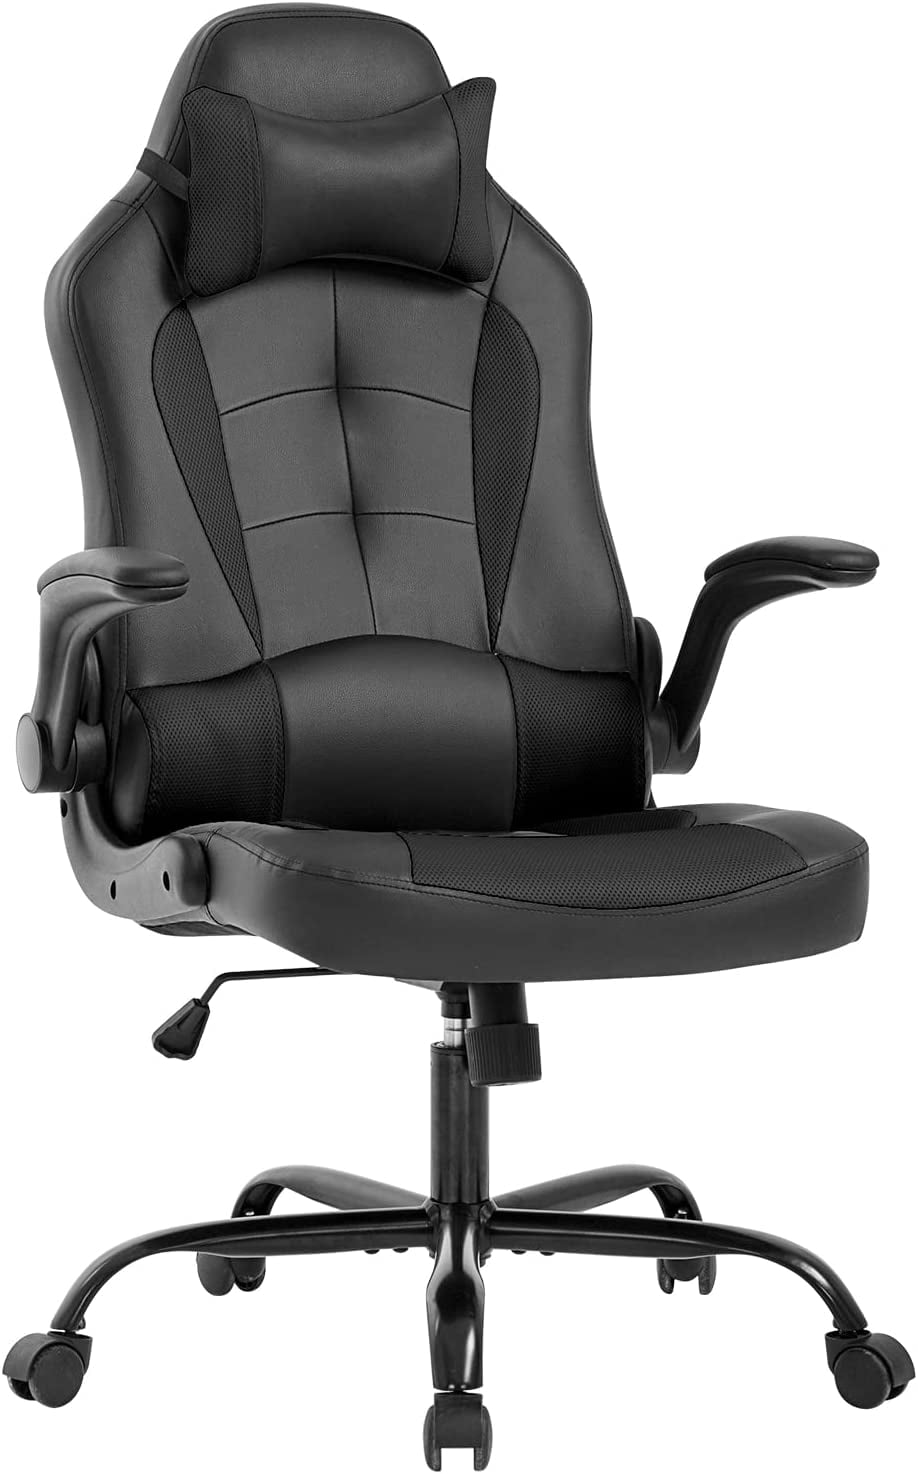 BestOffice PC Gaming Chair Ergonomic Office Chair Desk Chair with ...